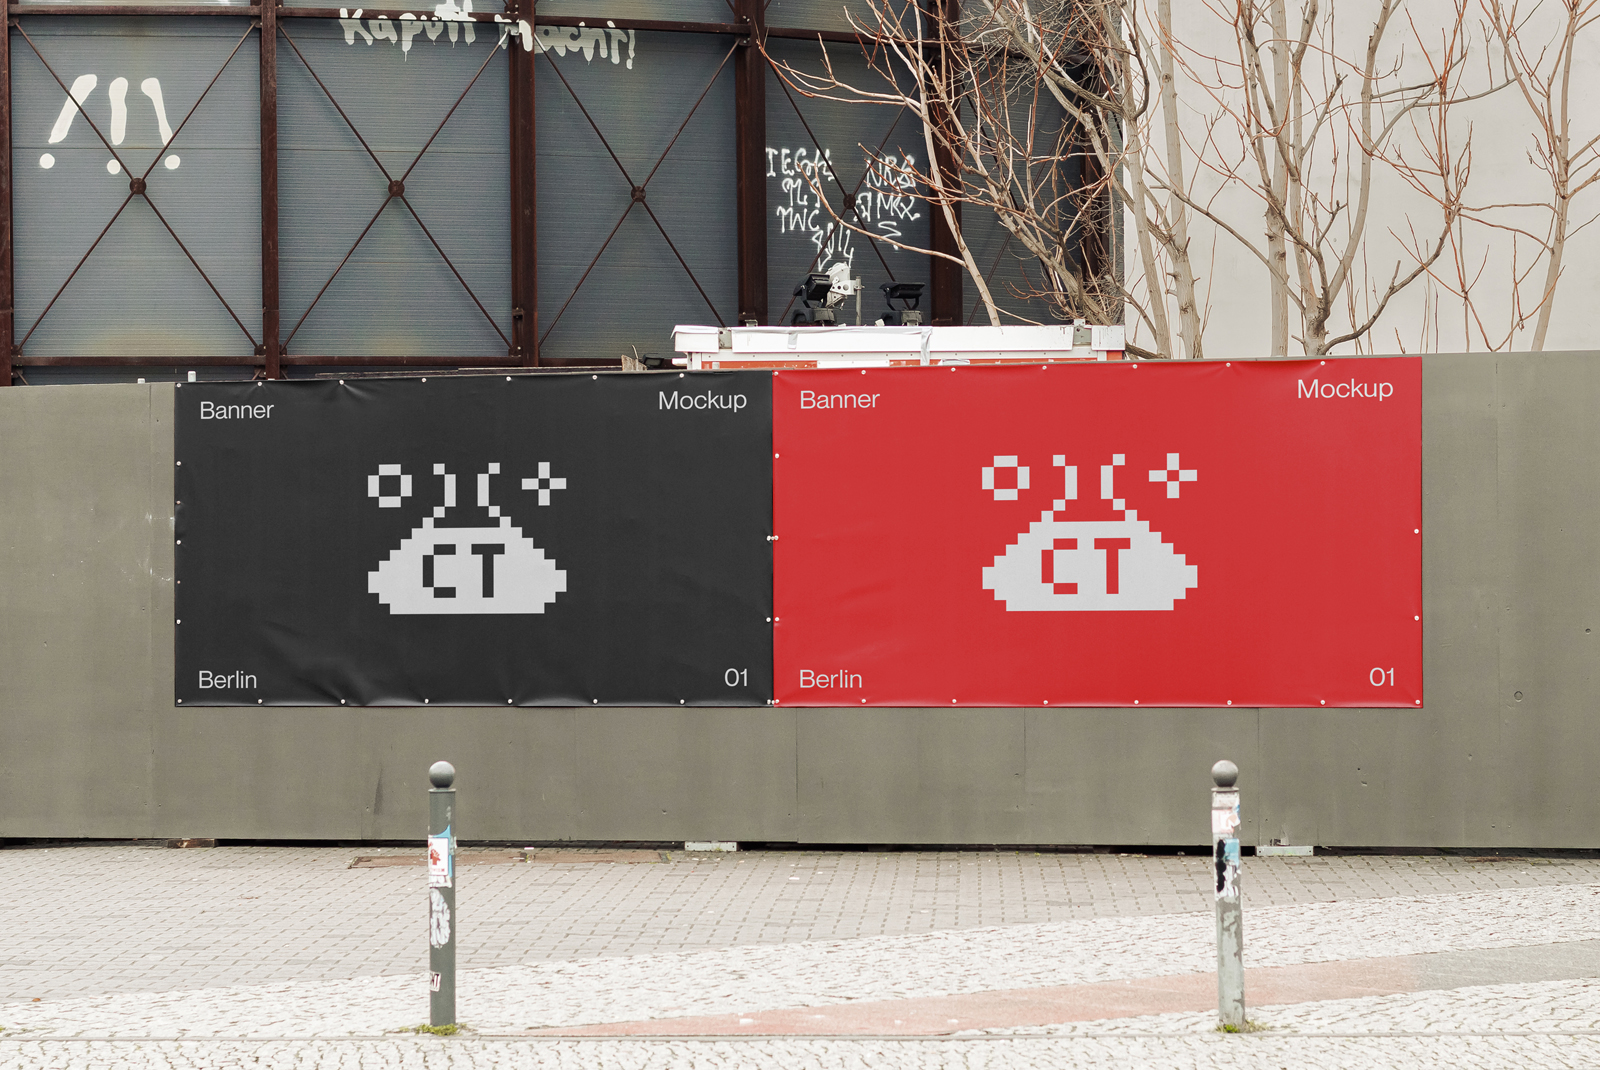 Urban billboard mockups featuring pixelated spaceship design, displayed in an outdoor setting for graphic design and marketing presentation.